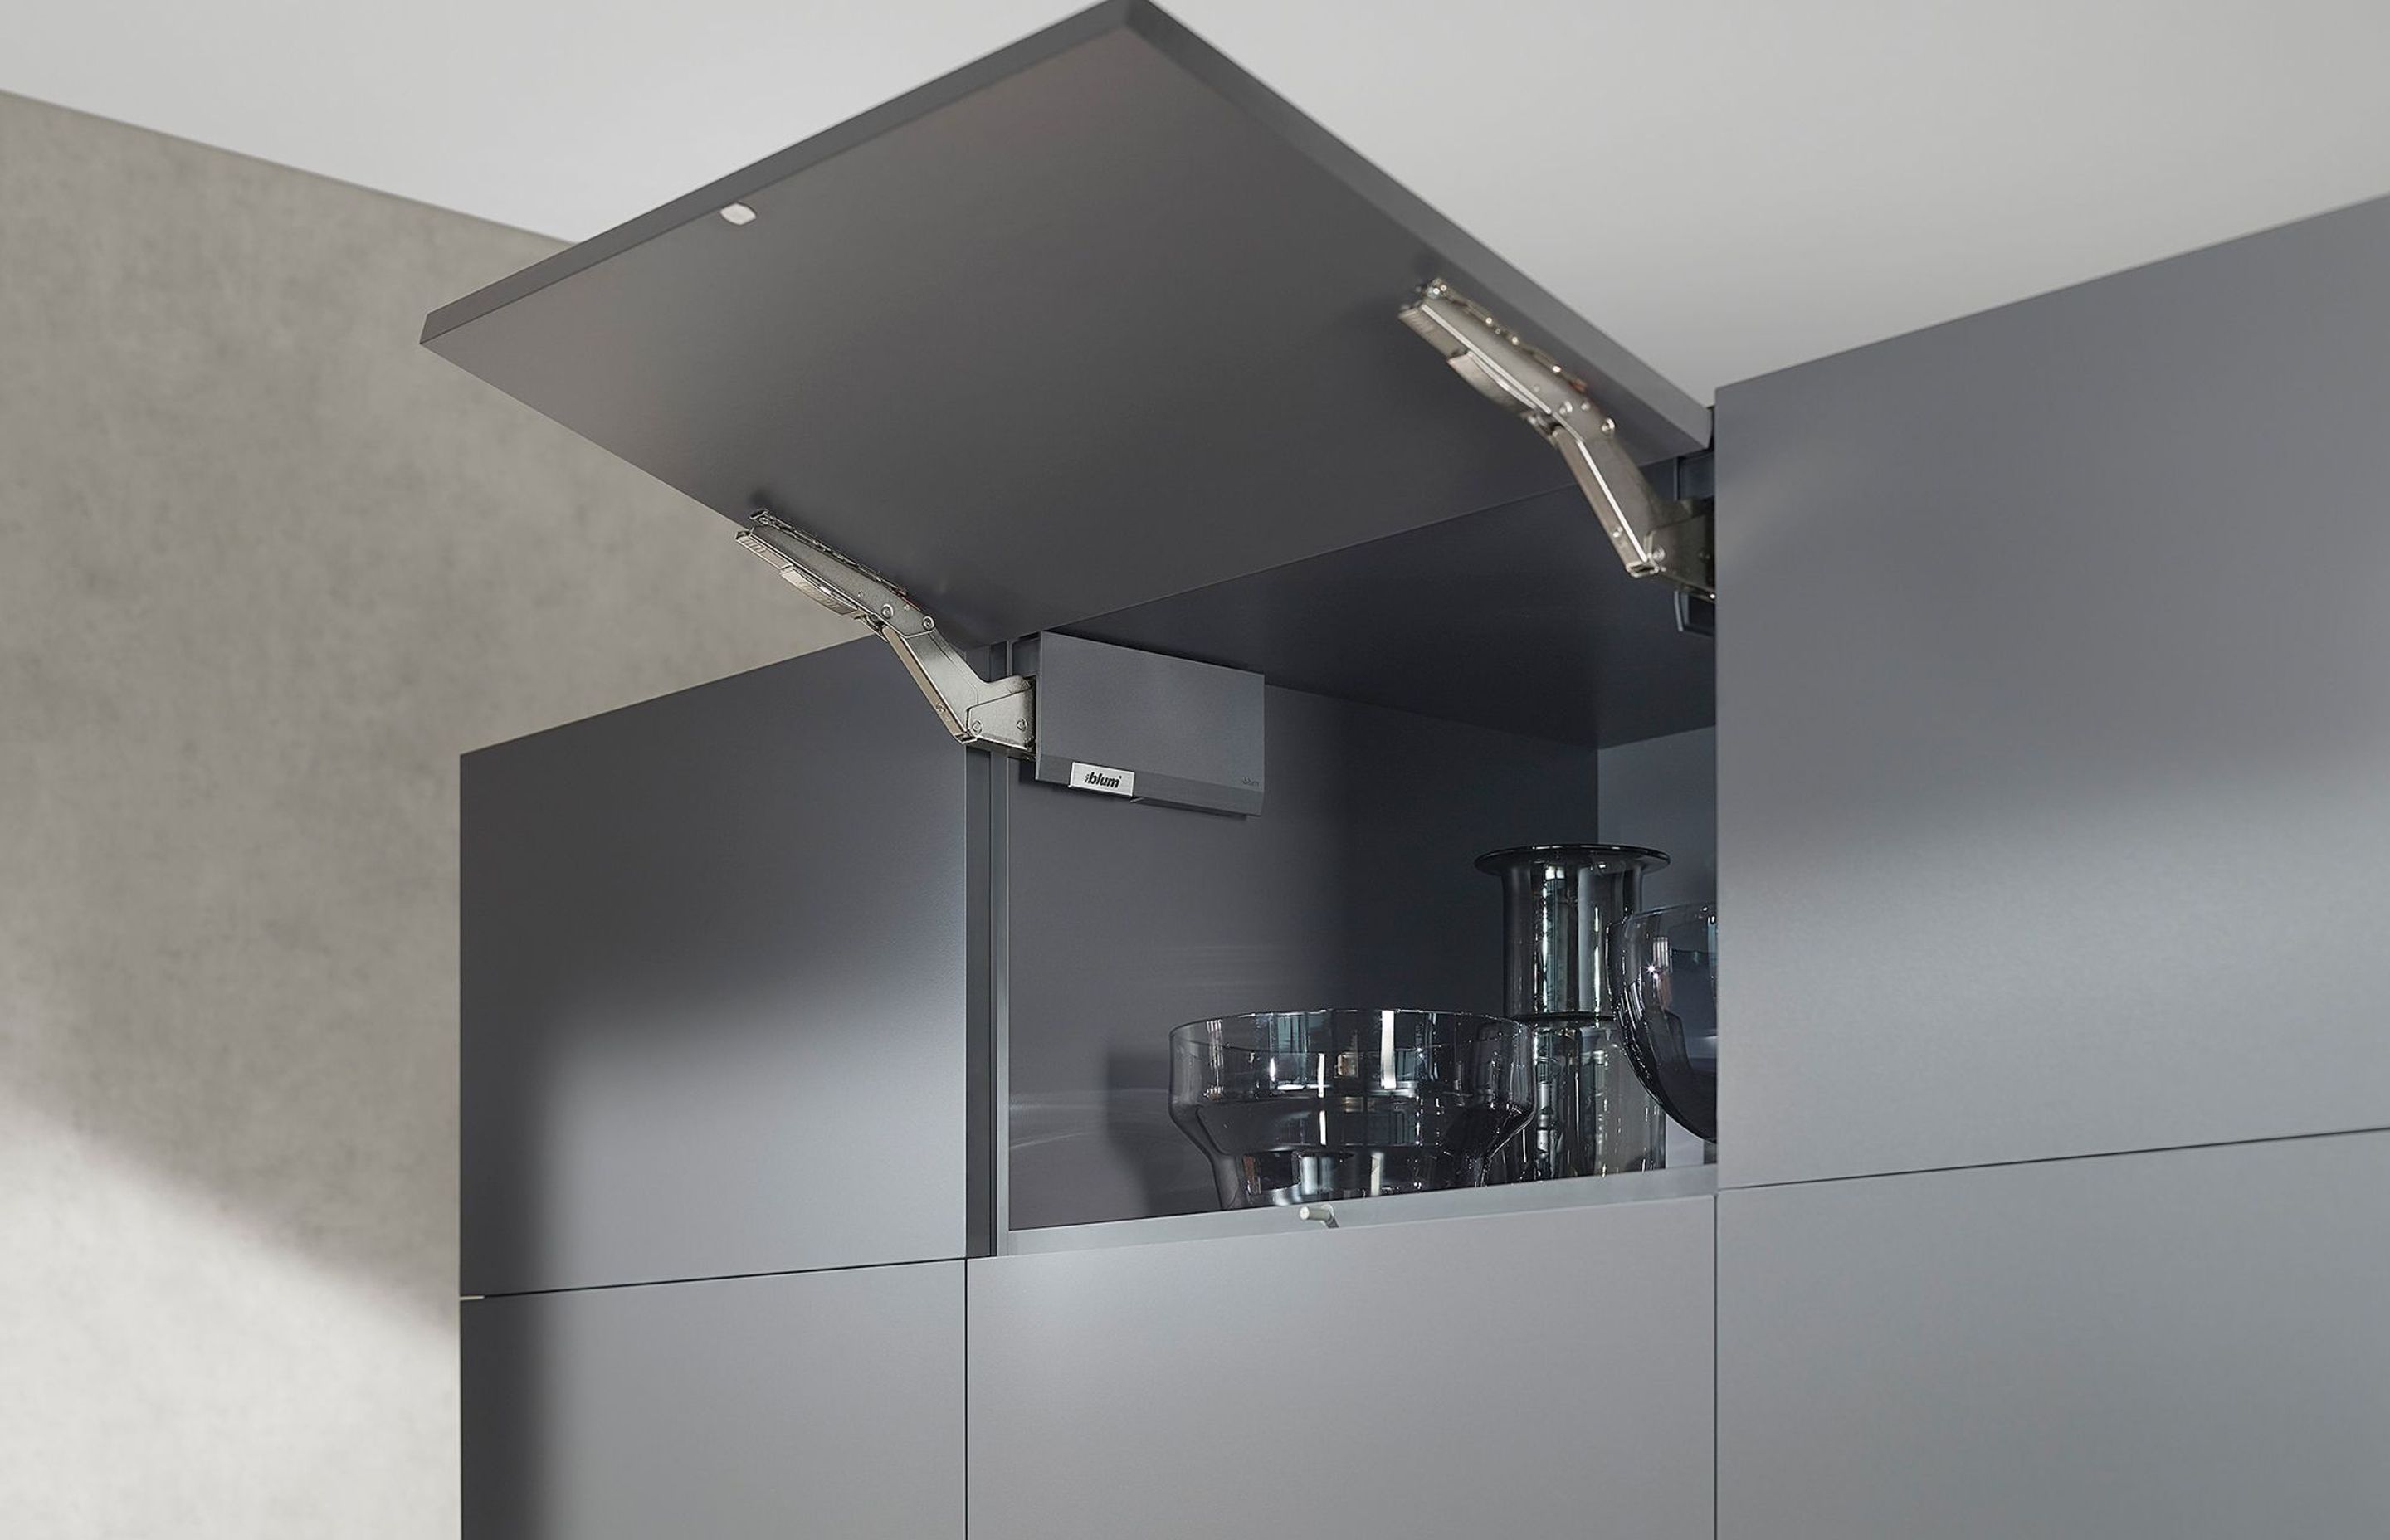 Give cabinet designs a lift with the AVENTOS HK top opening system